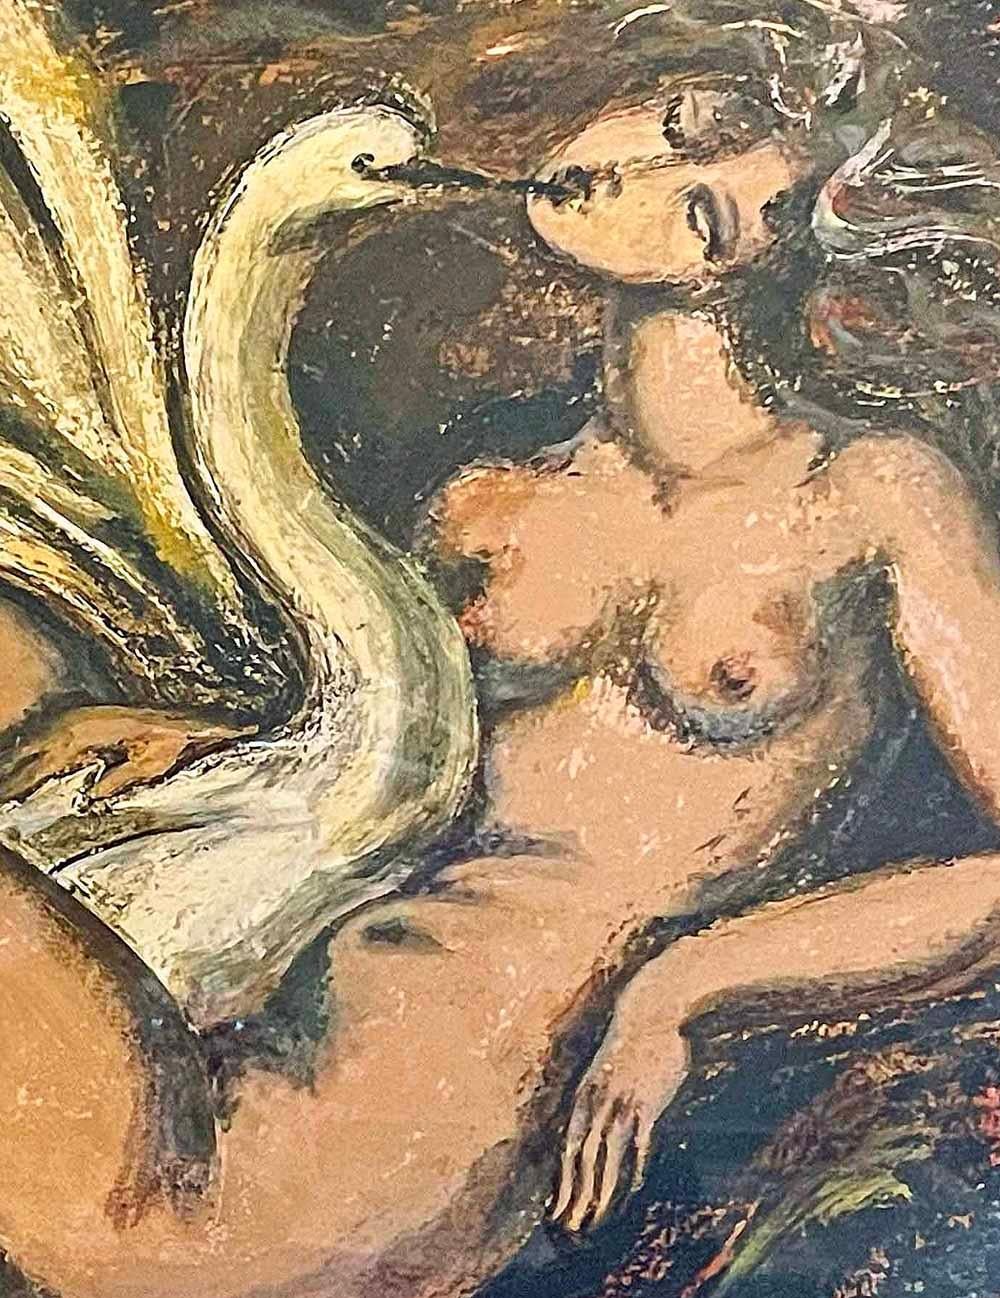 Like many of his contemporaries in the 1920s and 1930s, in both America and France, Buthaud was fascinated with figures from classic mythology.  Leda and the Swan was a motif he returned to repeatedly, in both ceramics and painting.  This very fine